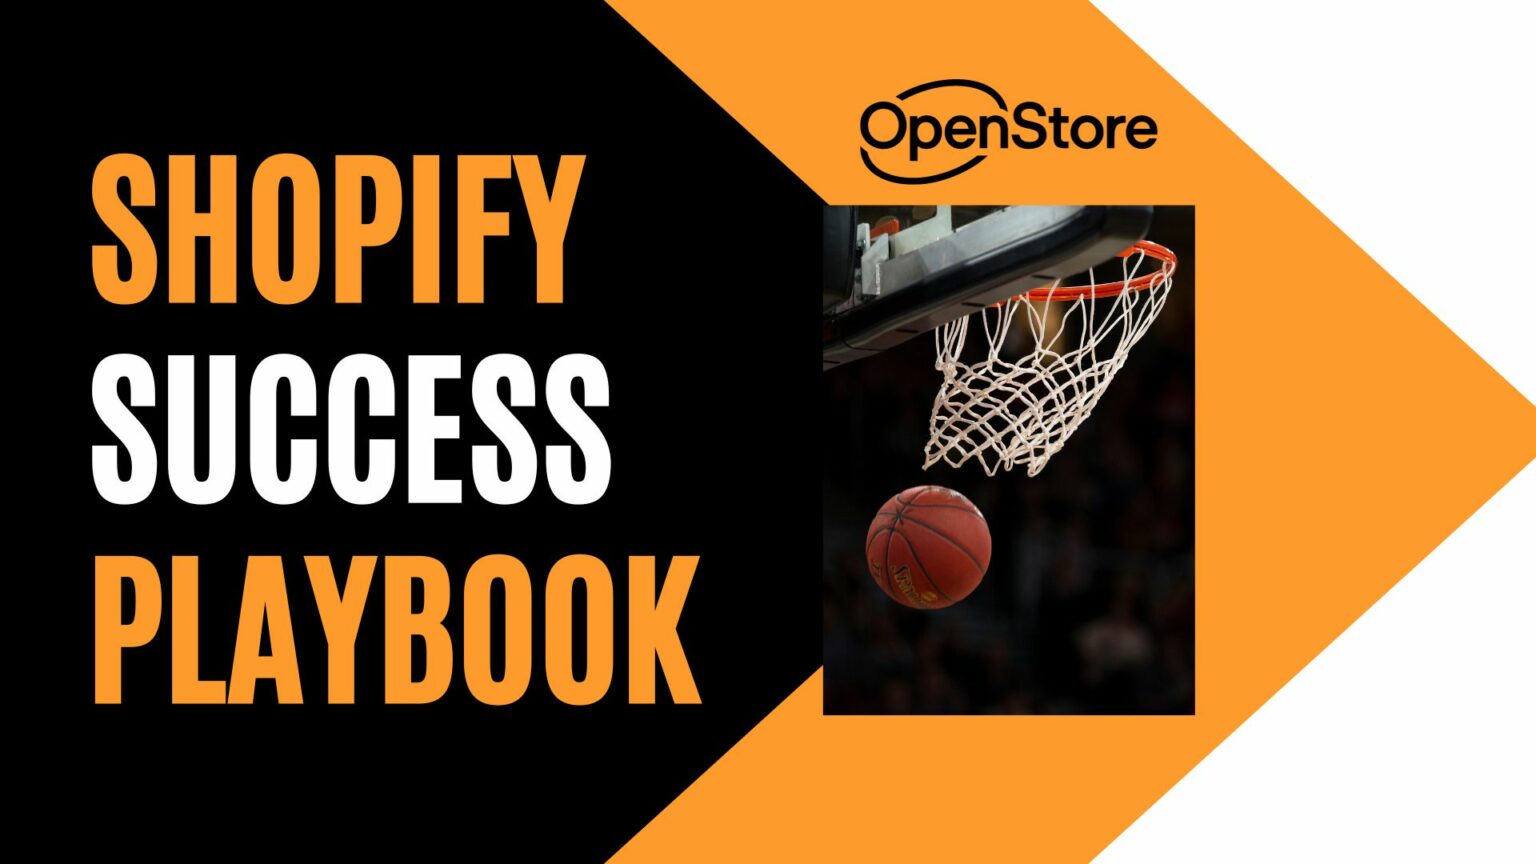 From $1M to $10M in 9 Months: OpenStore's Shopify Success Playbook